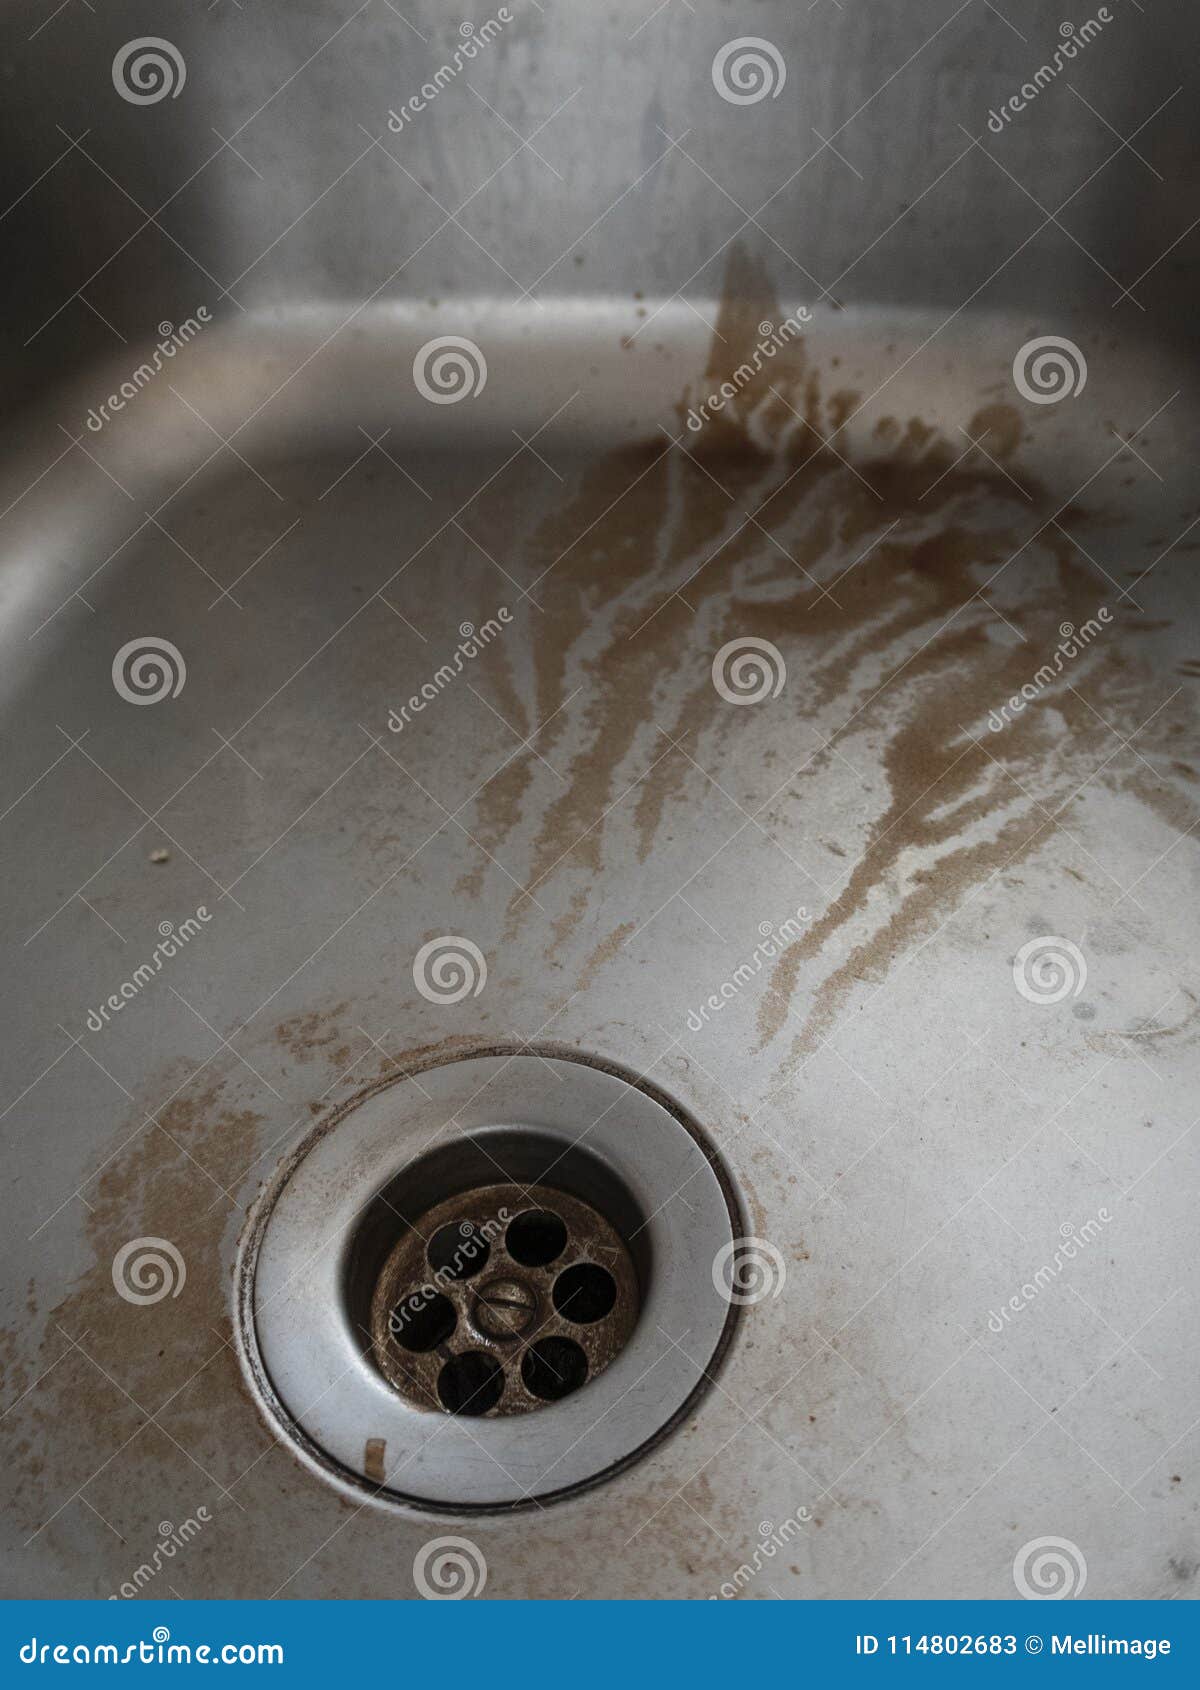 Dirty Stainless Steel Sink Stock Image Image Of Filthy